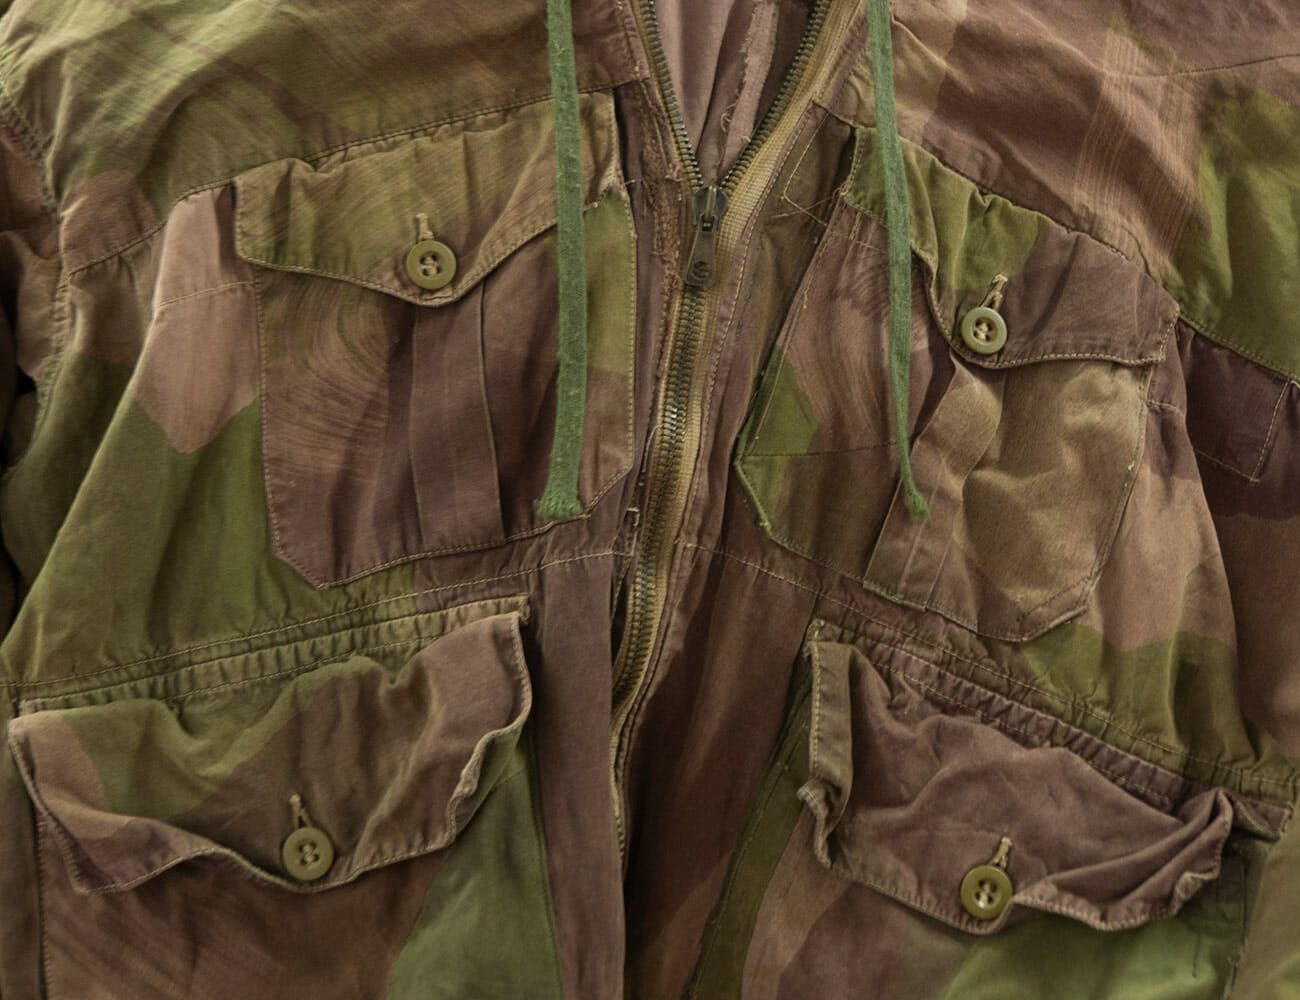 These Vintage Military Uniforms Feature the Forerunners of Modern